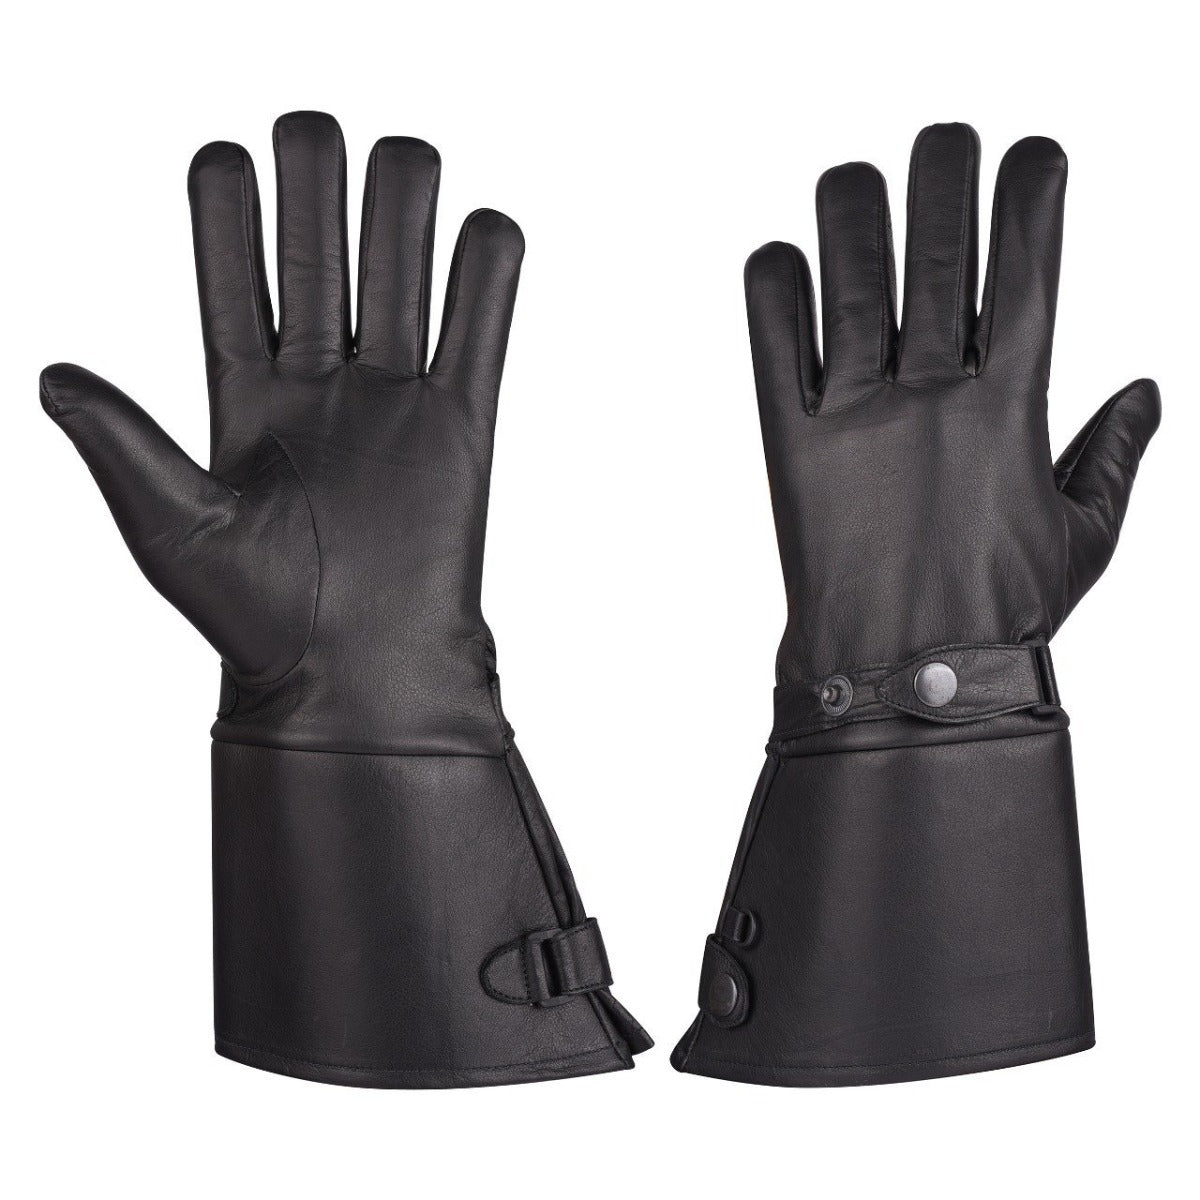 Vance Men’s Thermal Lined Leather Gauntlet Gloves w Snap Wrist & Cuff